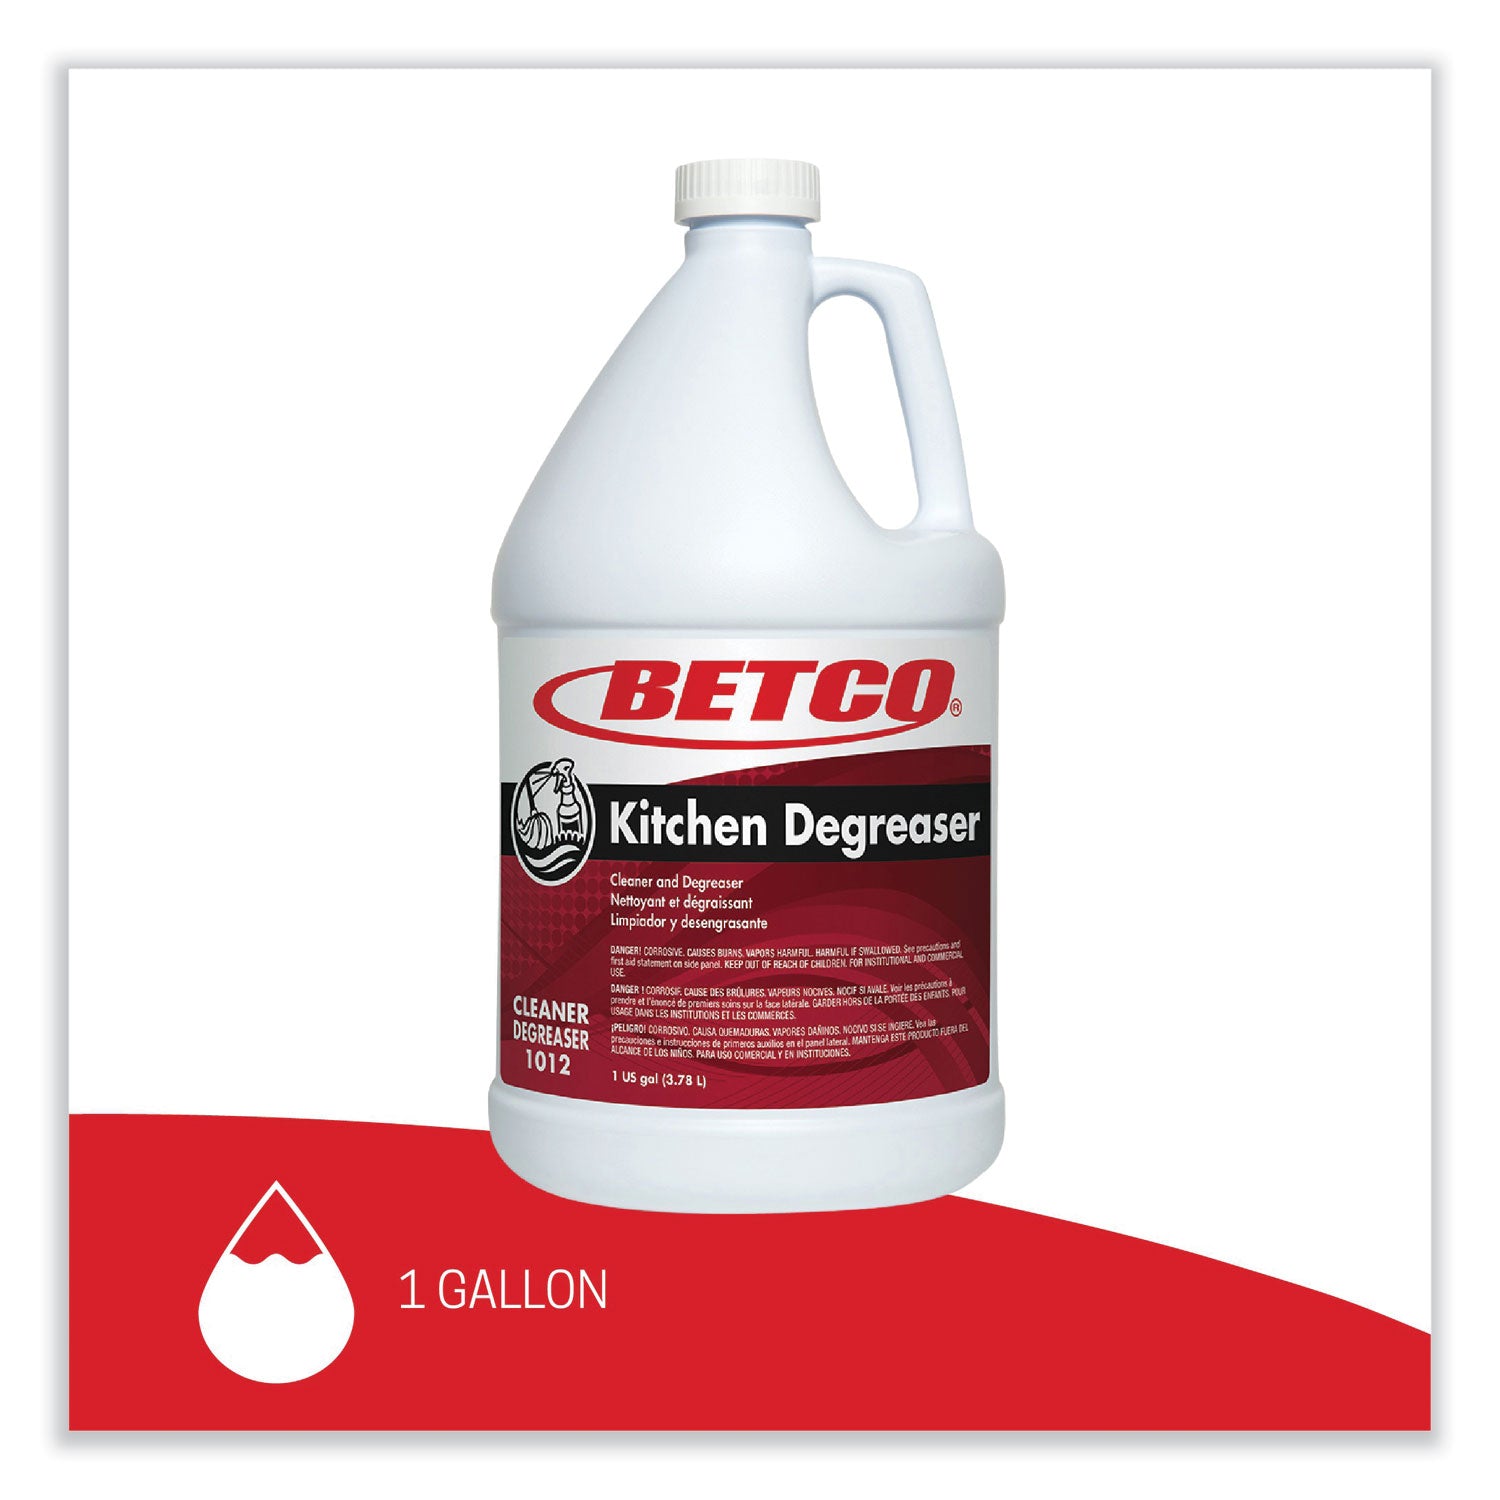 kitchen-degreaser-characteristic-scent-1-gal-bottle-4-carton_bet10120400 - 5